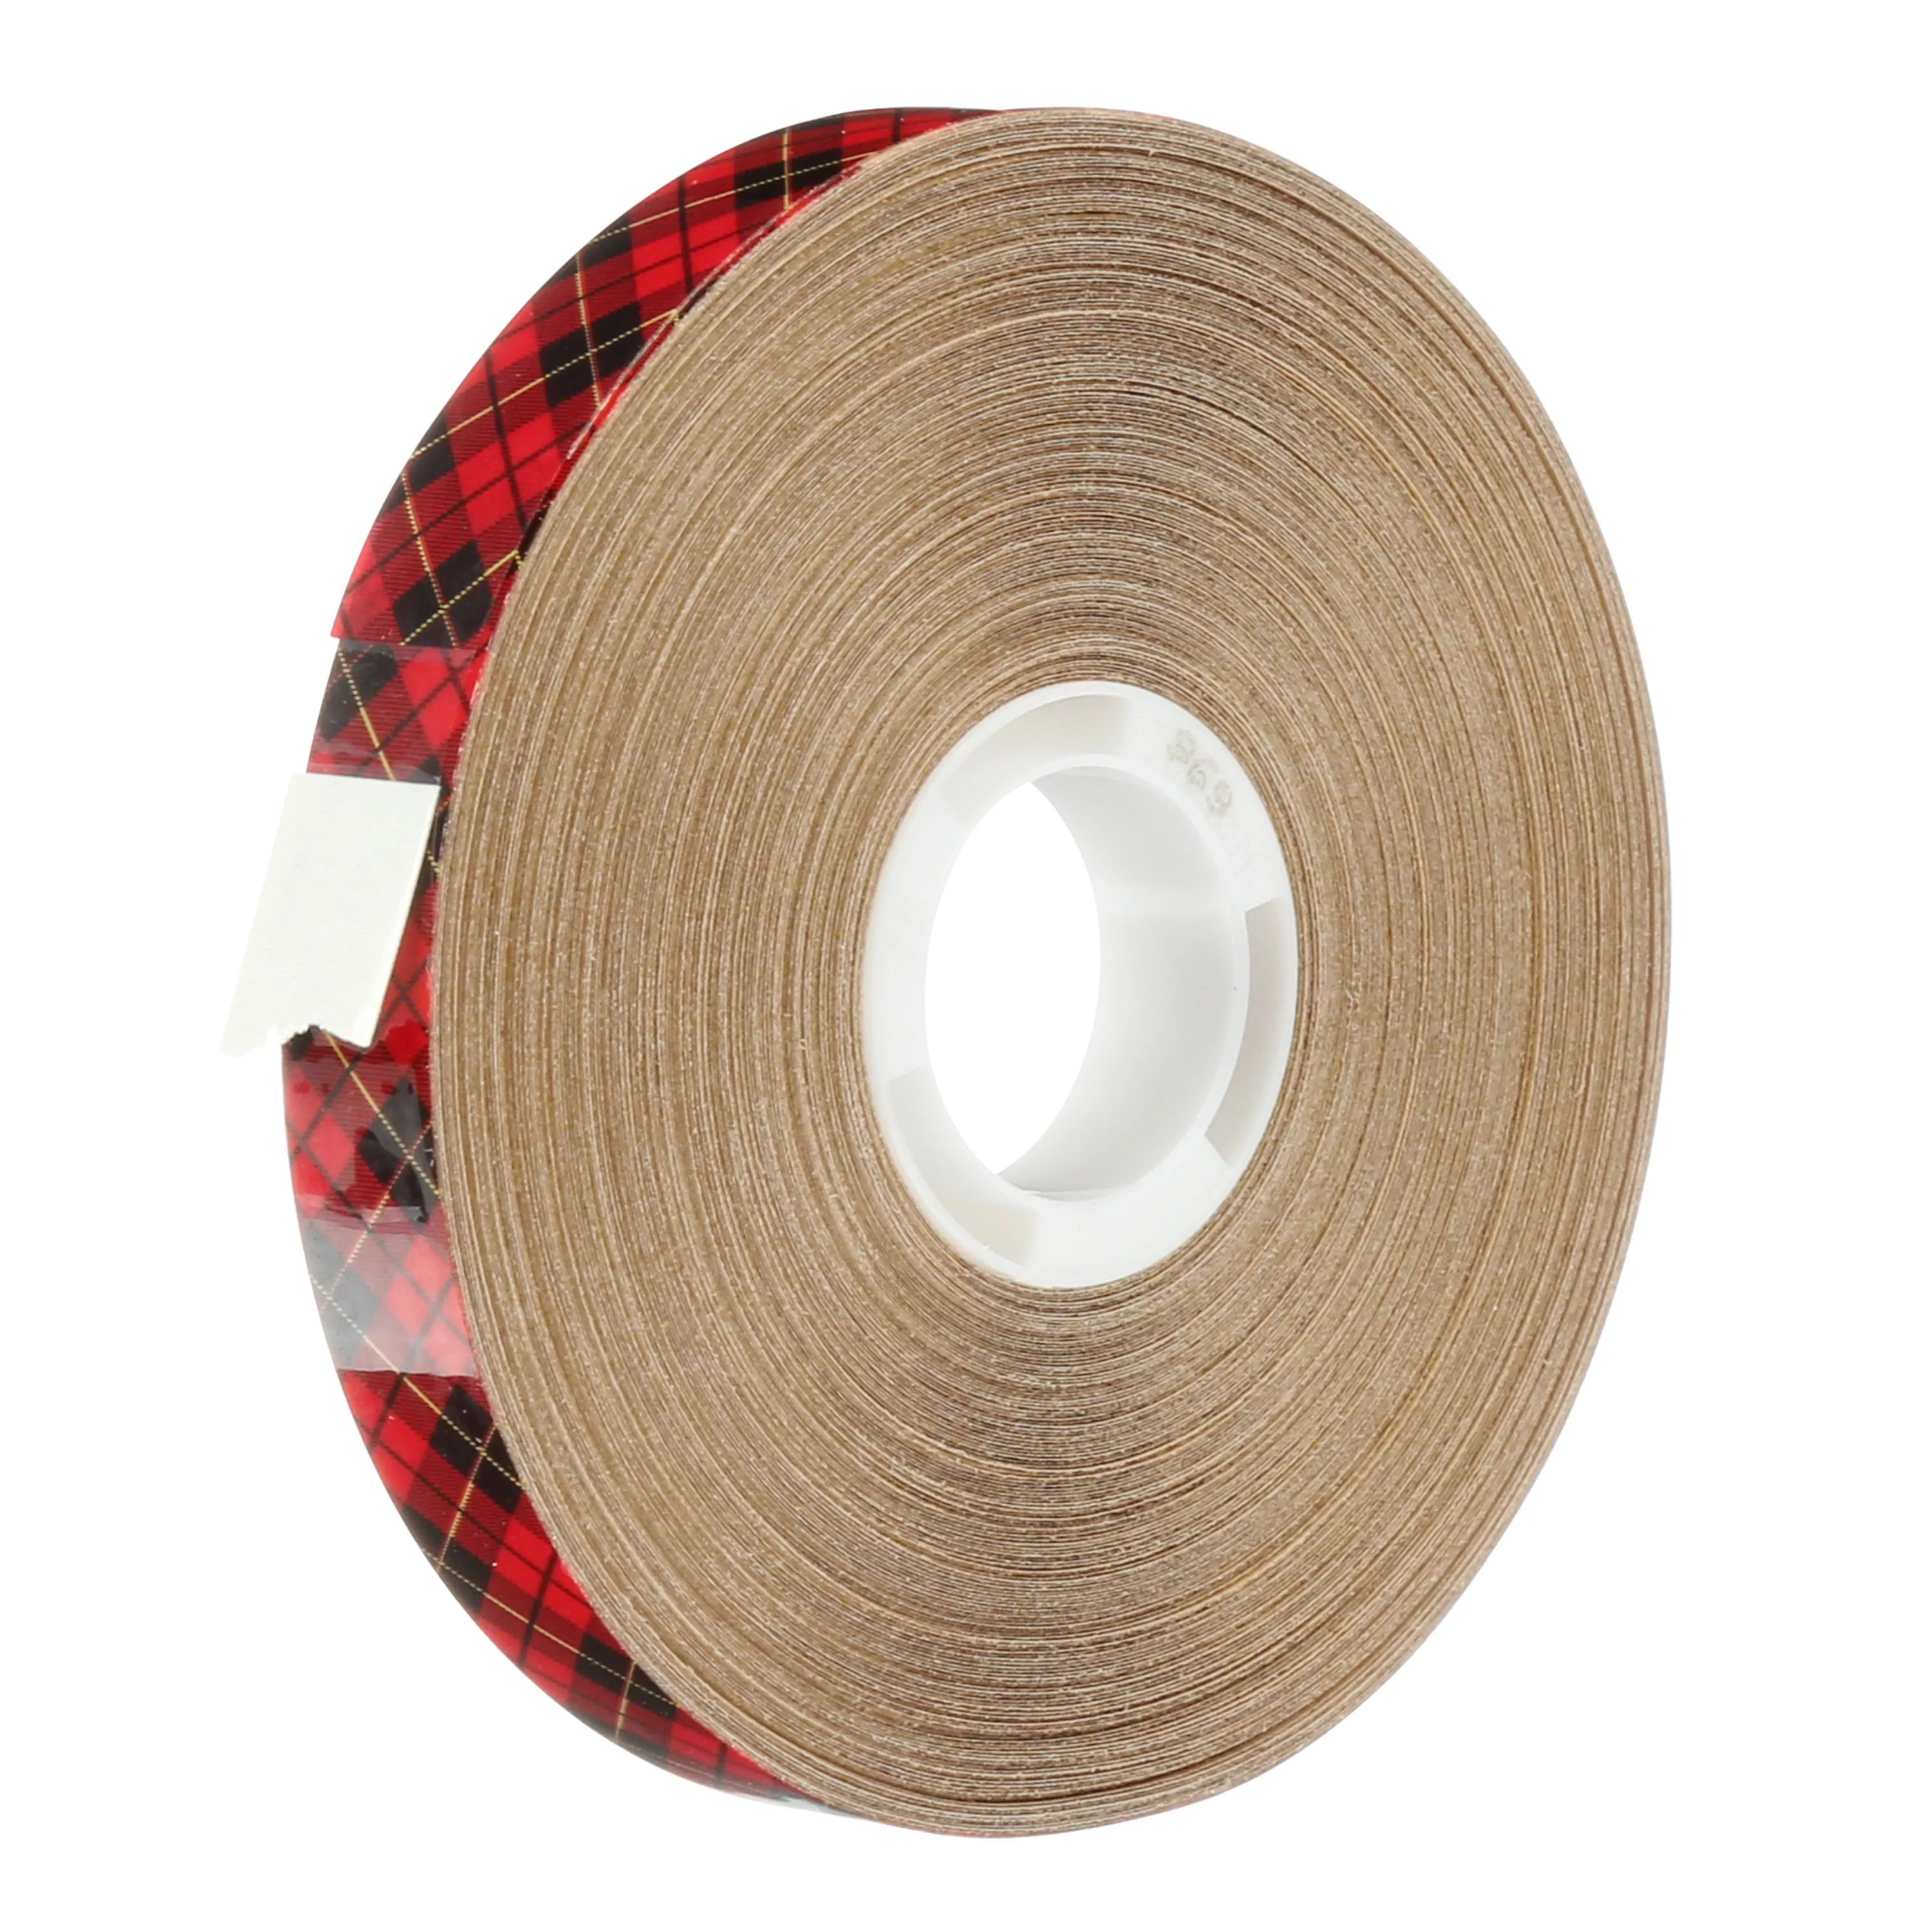 Scotch® ATG Adhesive Transfer Tape 969, Clear, 1/2 in x 36 yd, 5 mil,
(12 Roll/Carton) 72 Roll/Case